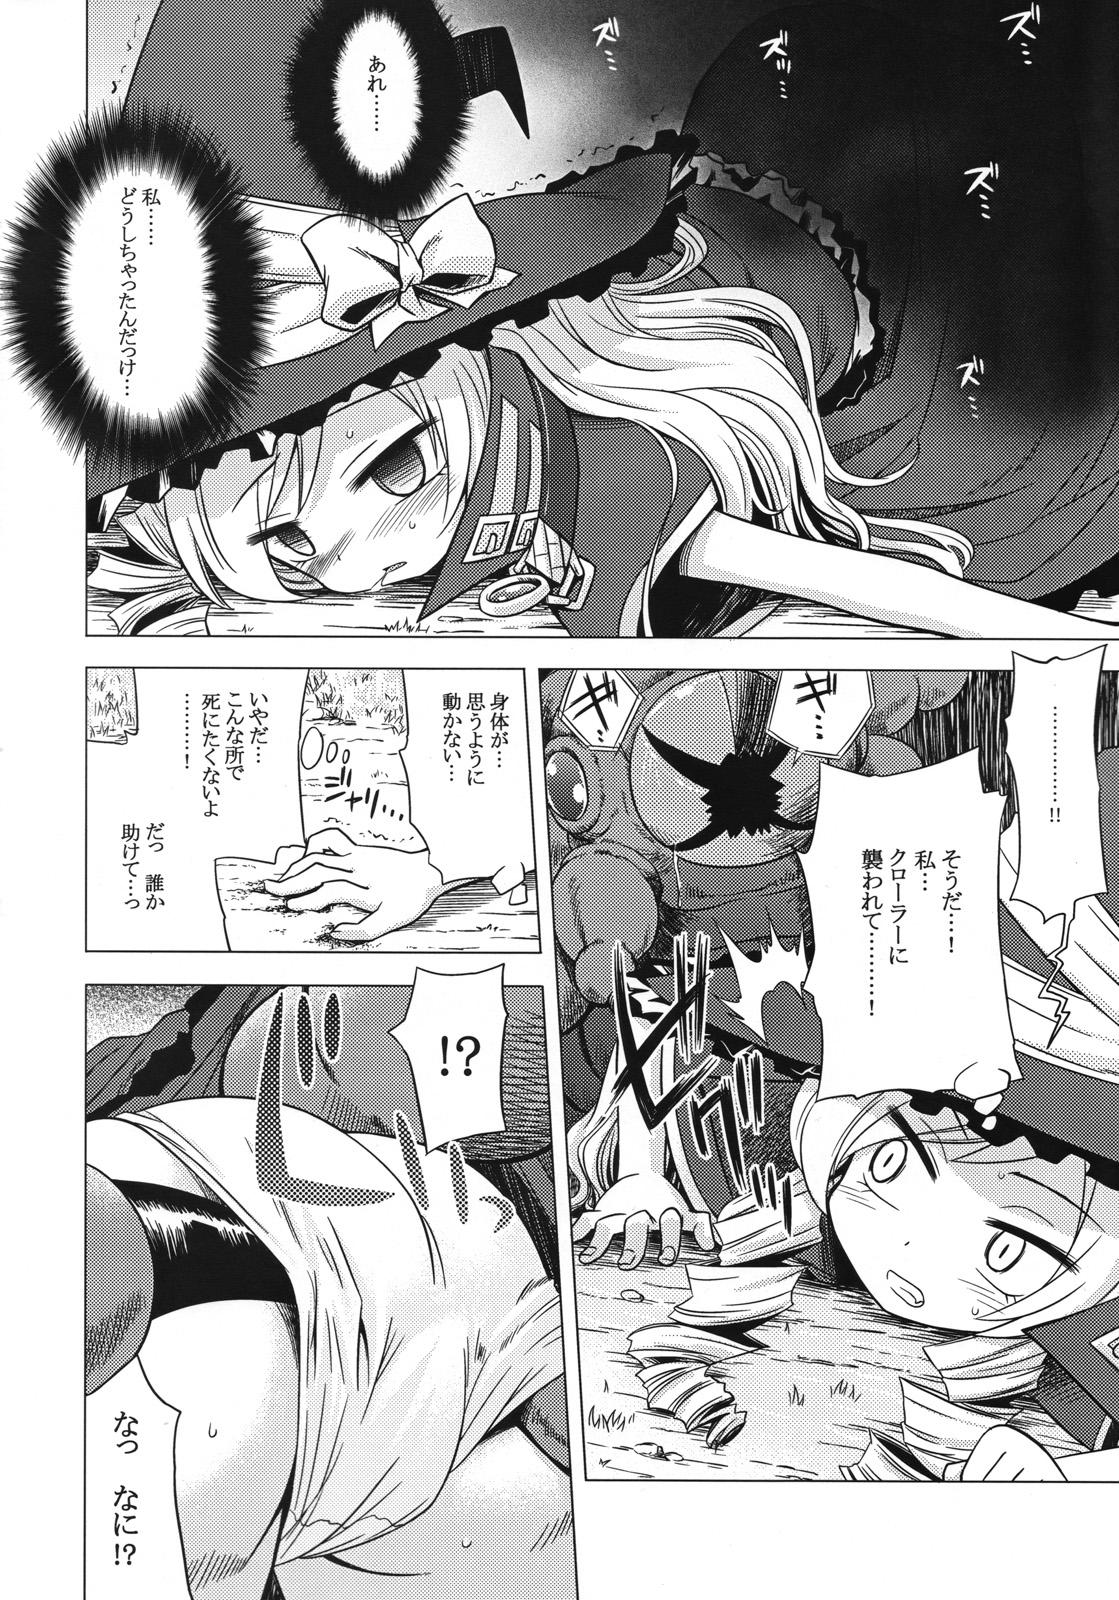 3some Sekaiju no Anone 4 - Etrian odyssey Gay Rimming - Page 3